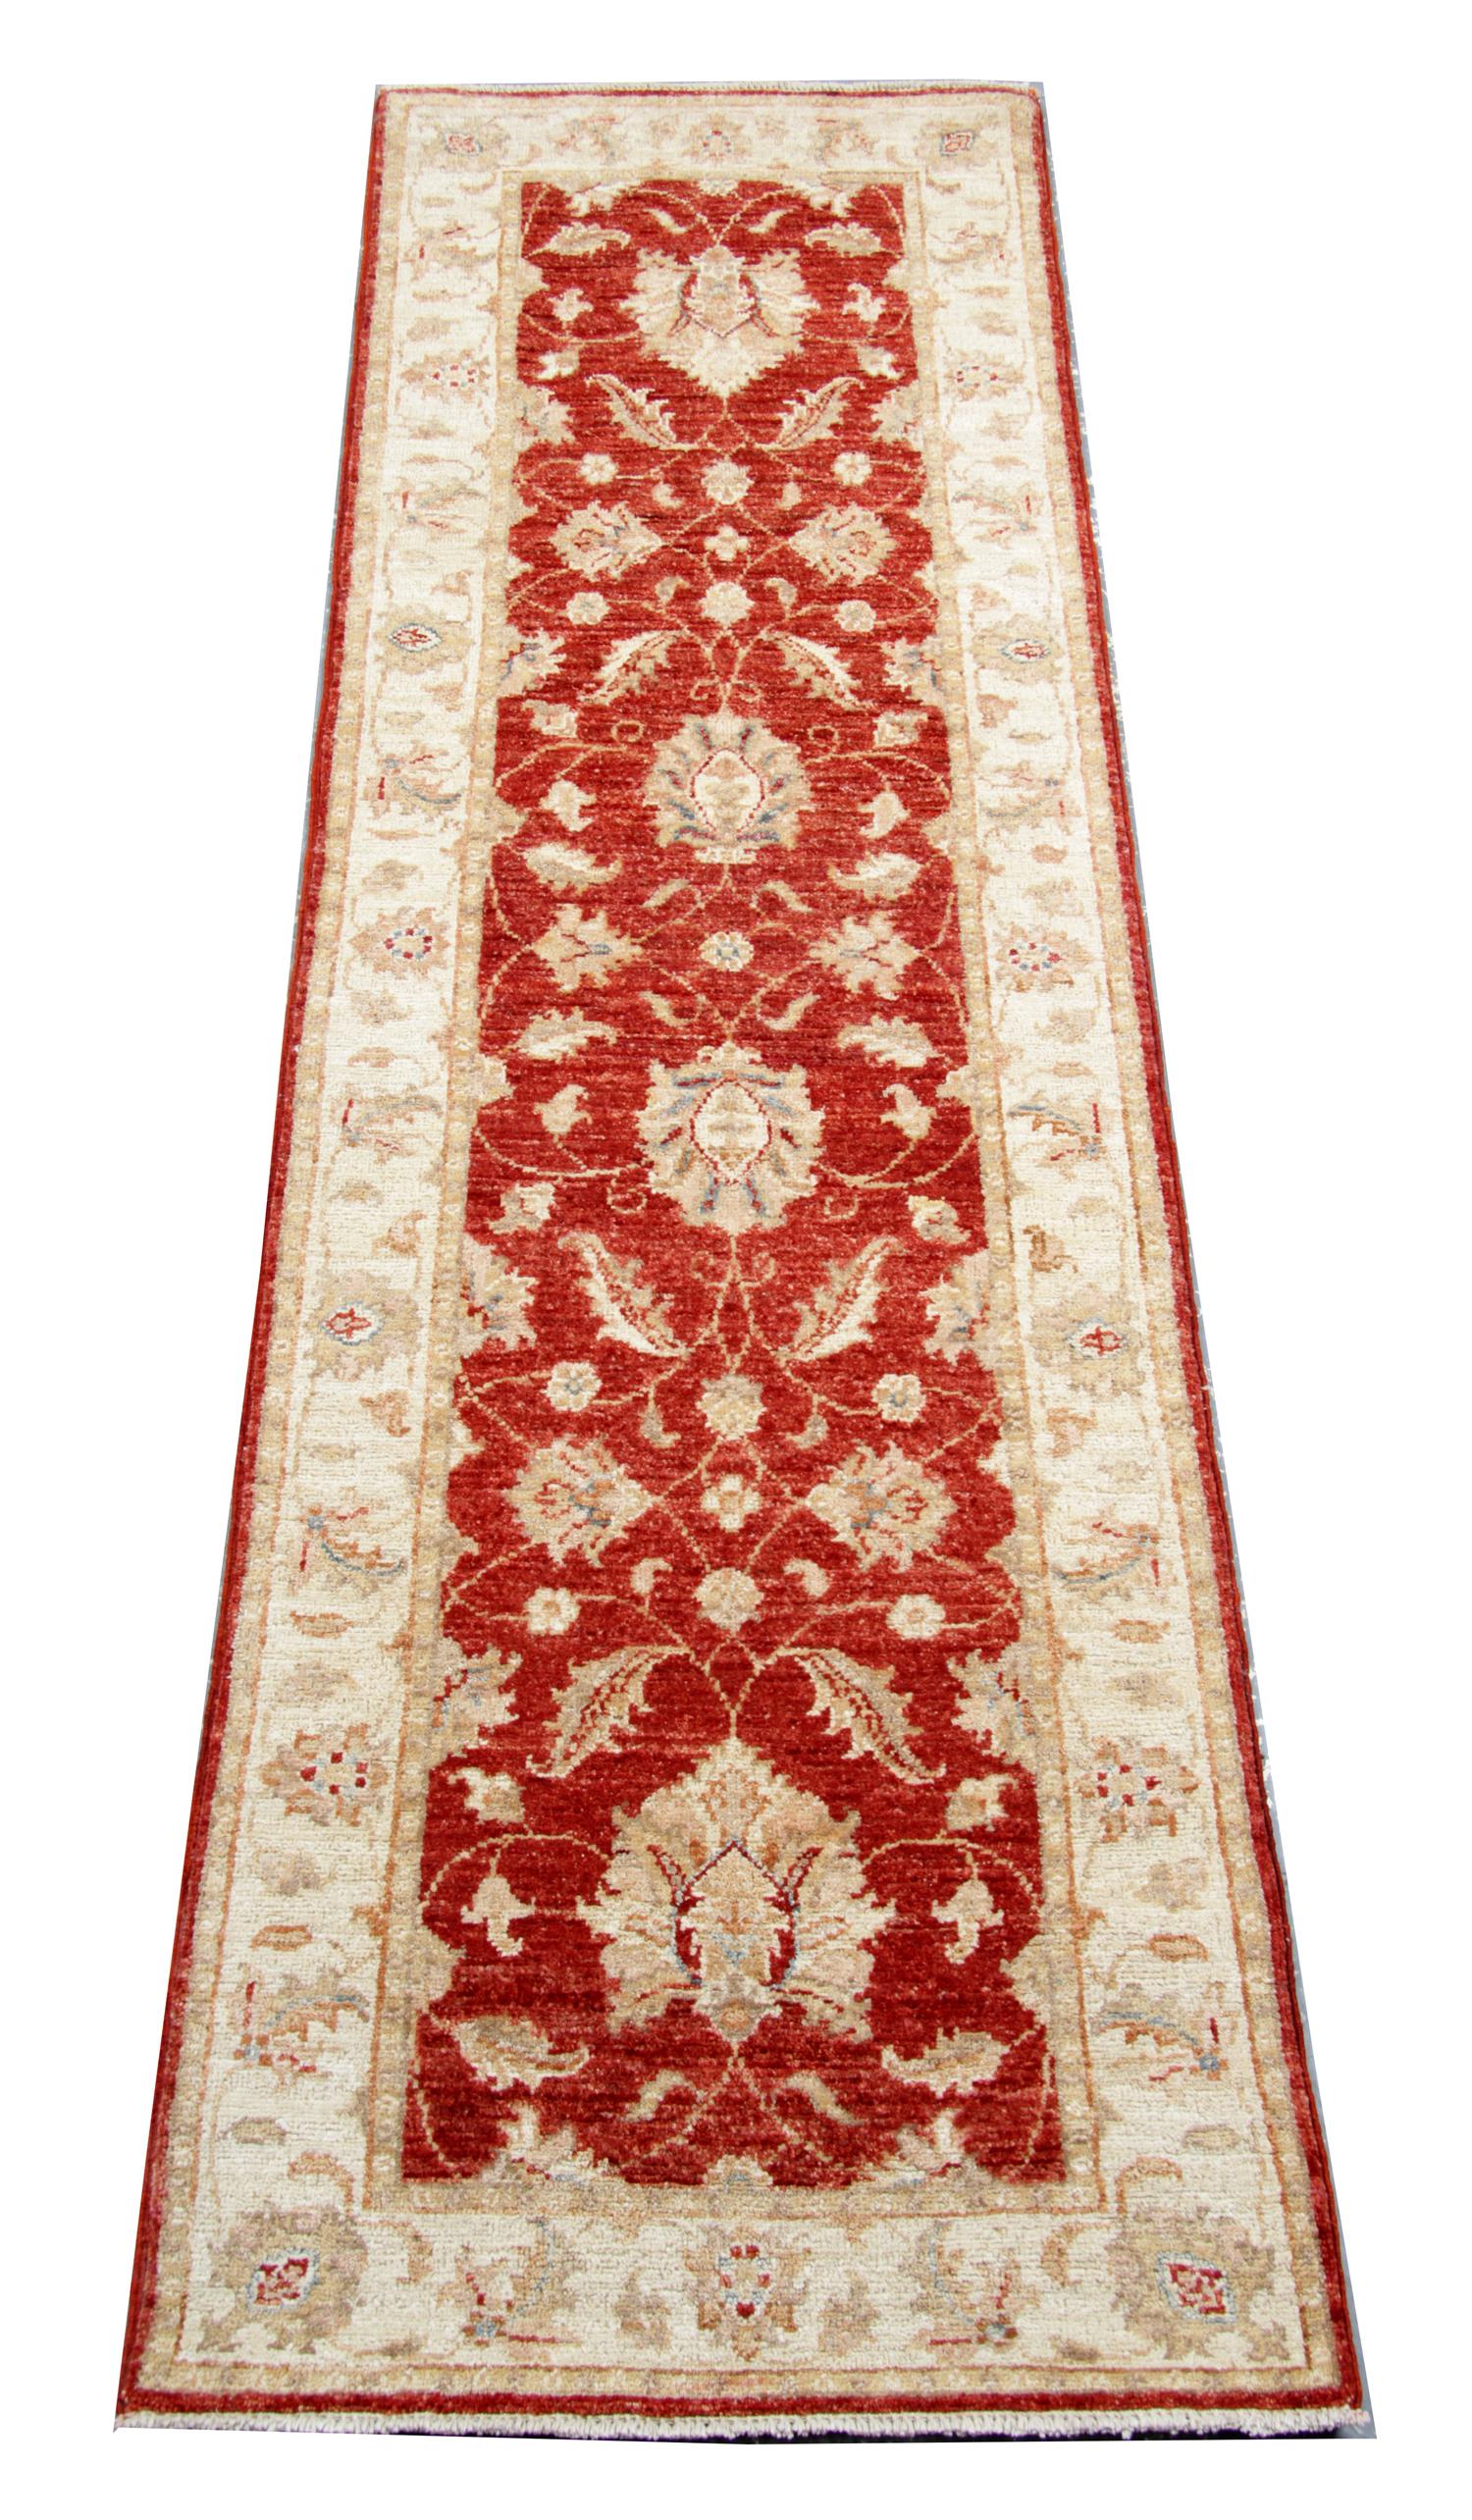 This modern Zielger runner rug features a traditional Saltanabad design. Woven on a loom in Afghanistan by master weavers. Woven with the finest hand-spun wool, which has been dyed using traditional organic vegetable dying techniques. The design